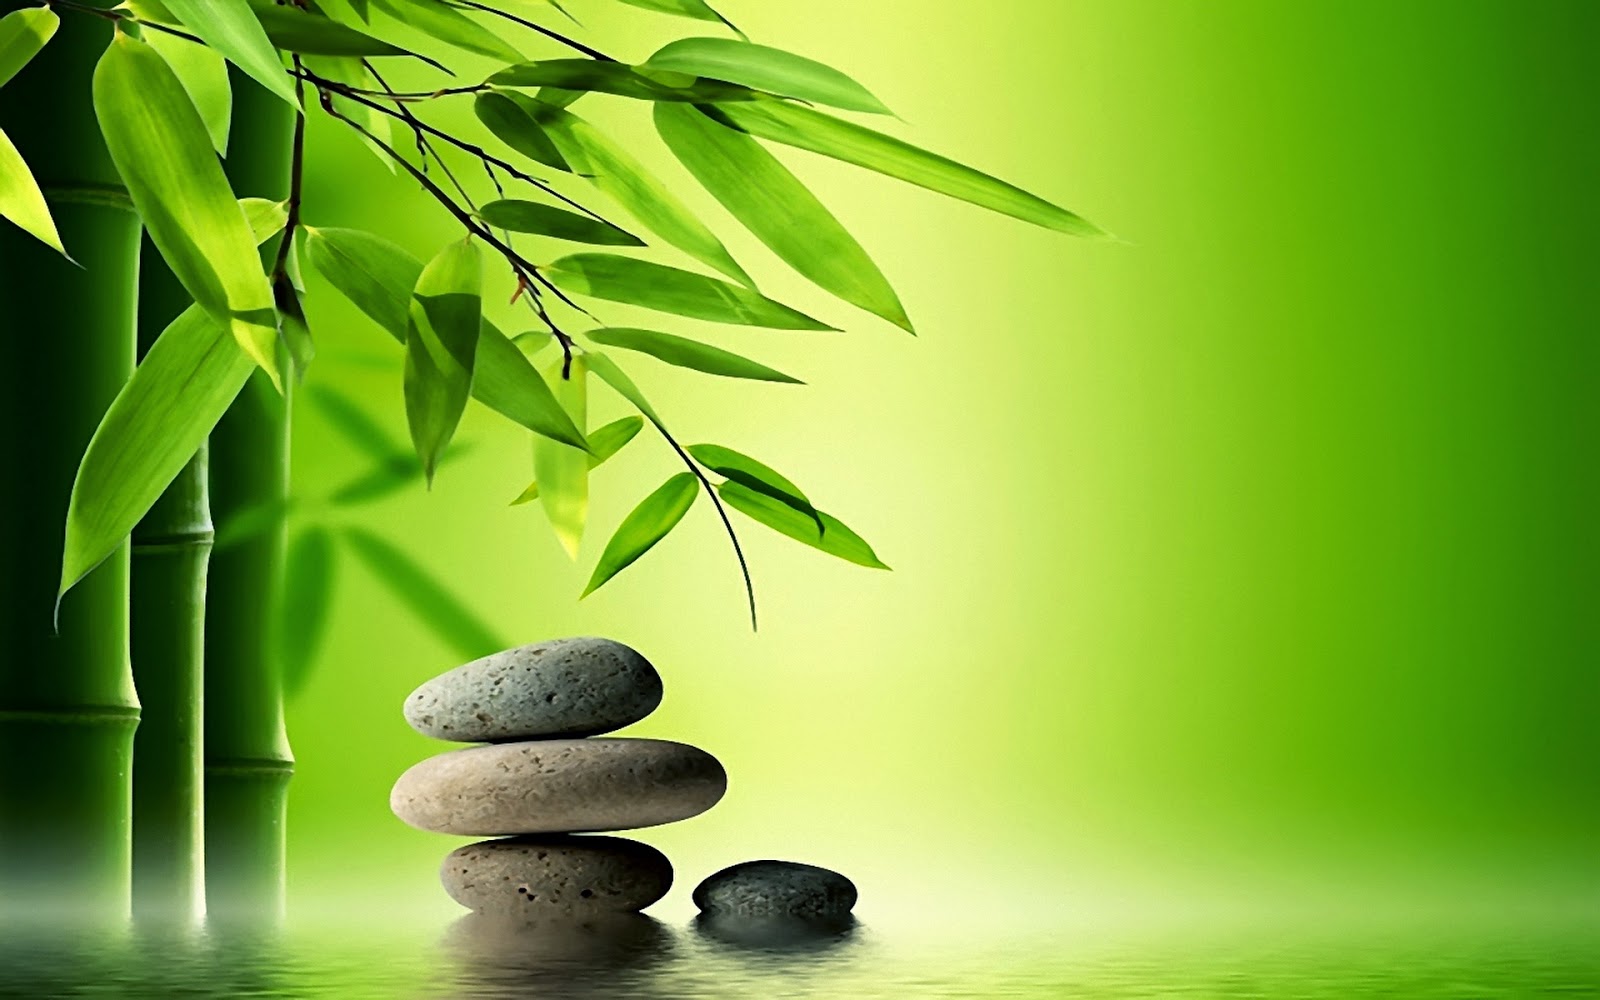 Chinese Zen meditation pictures 1080p Full HD widescreen Wallpapers 1600x1000